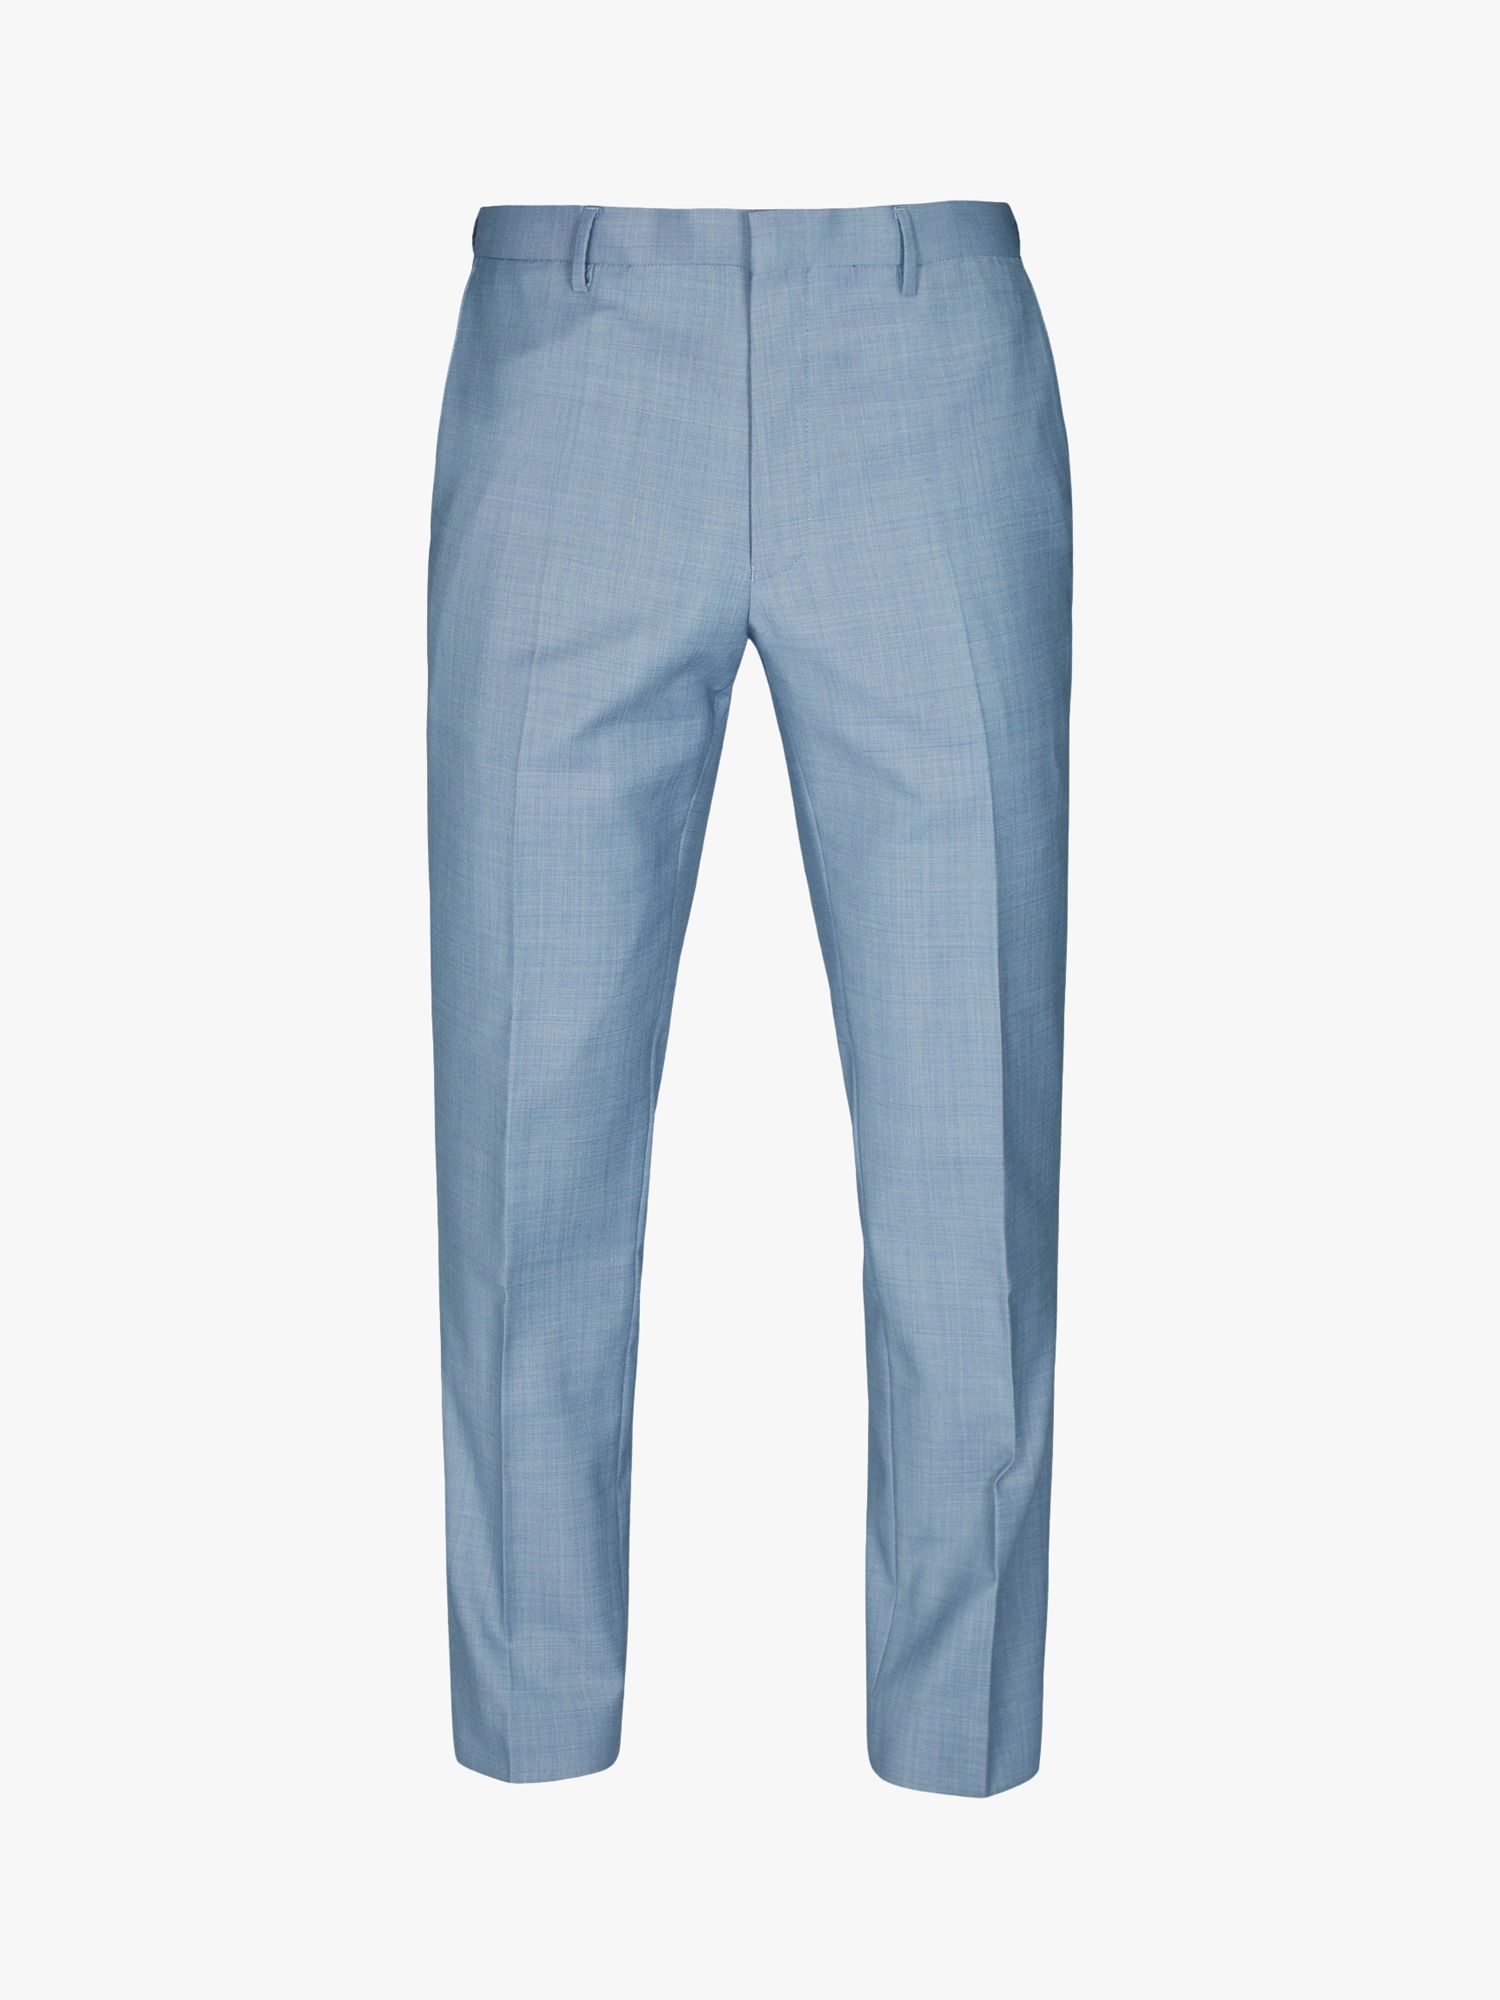 Buy Ted Baker Slim Fit Trousers, Blue Online at johnlewis.com